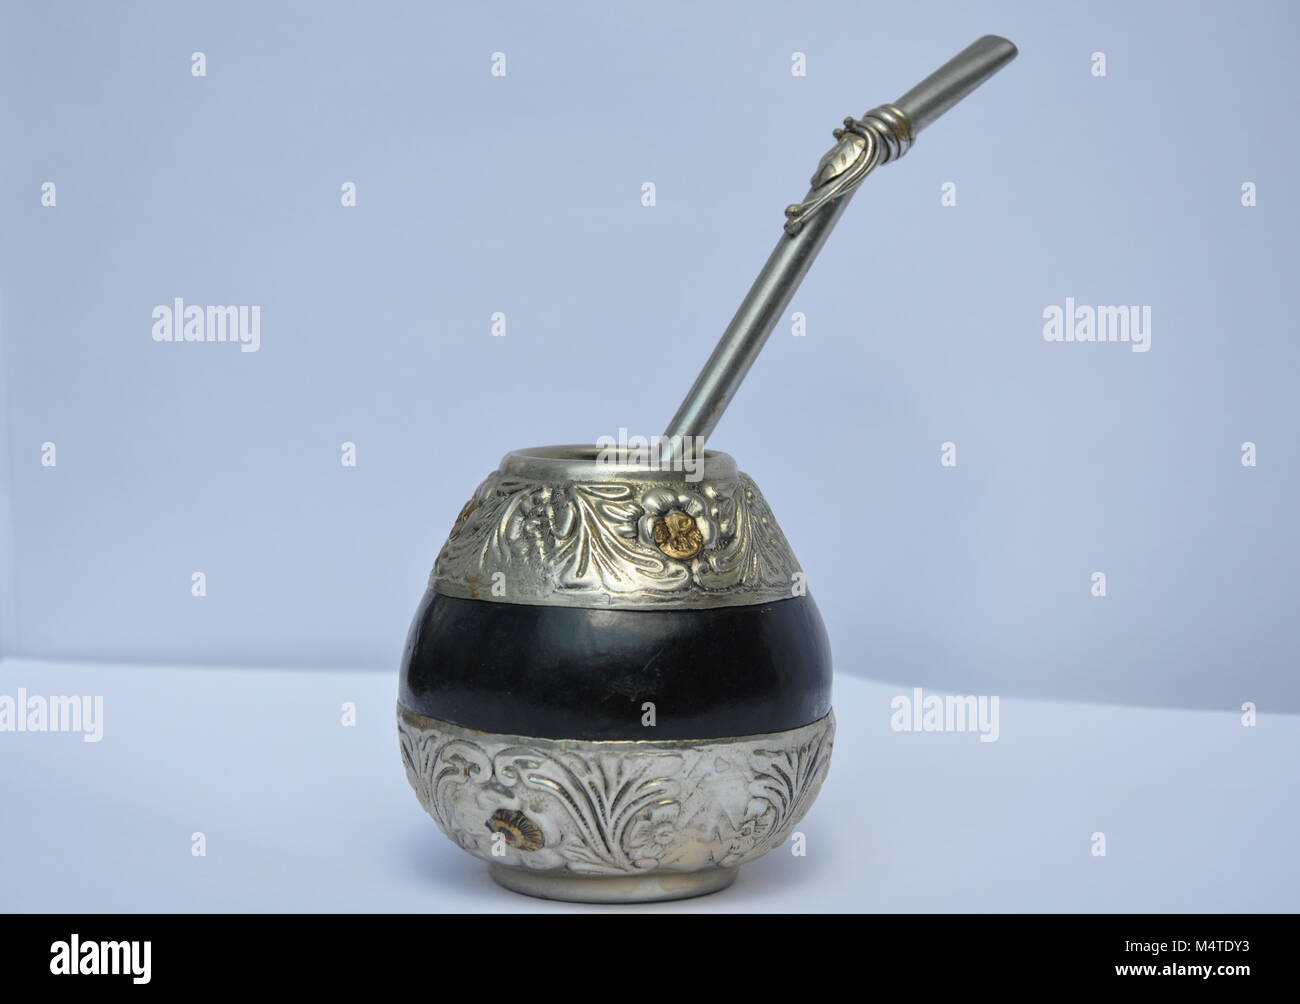 Elaborate chased metalwork mate tea gourd and bombilla from Argentina. Stock Photo